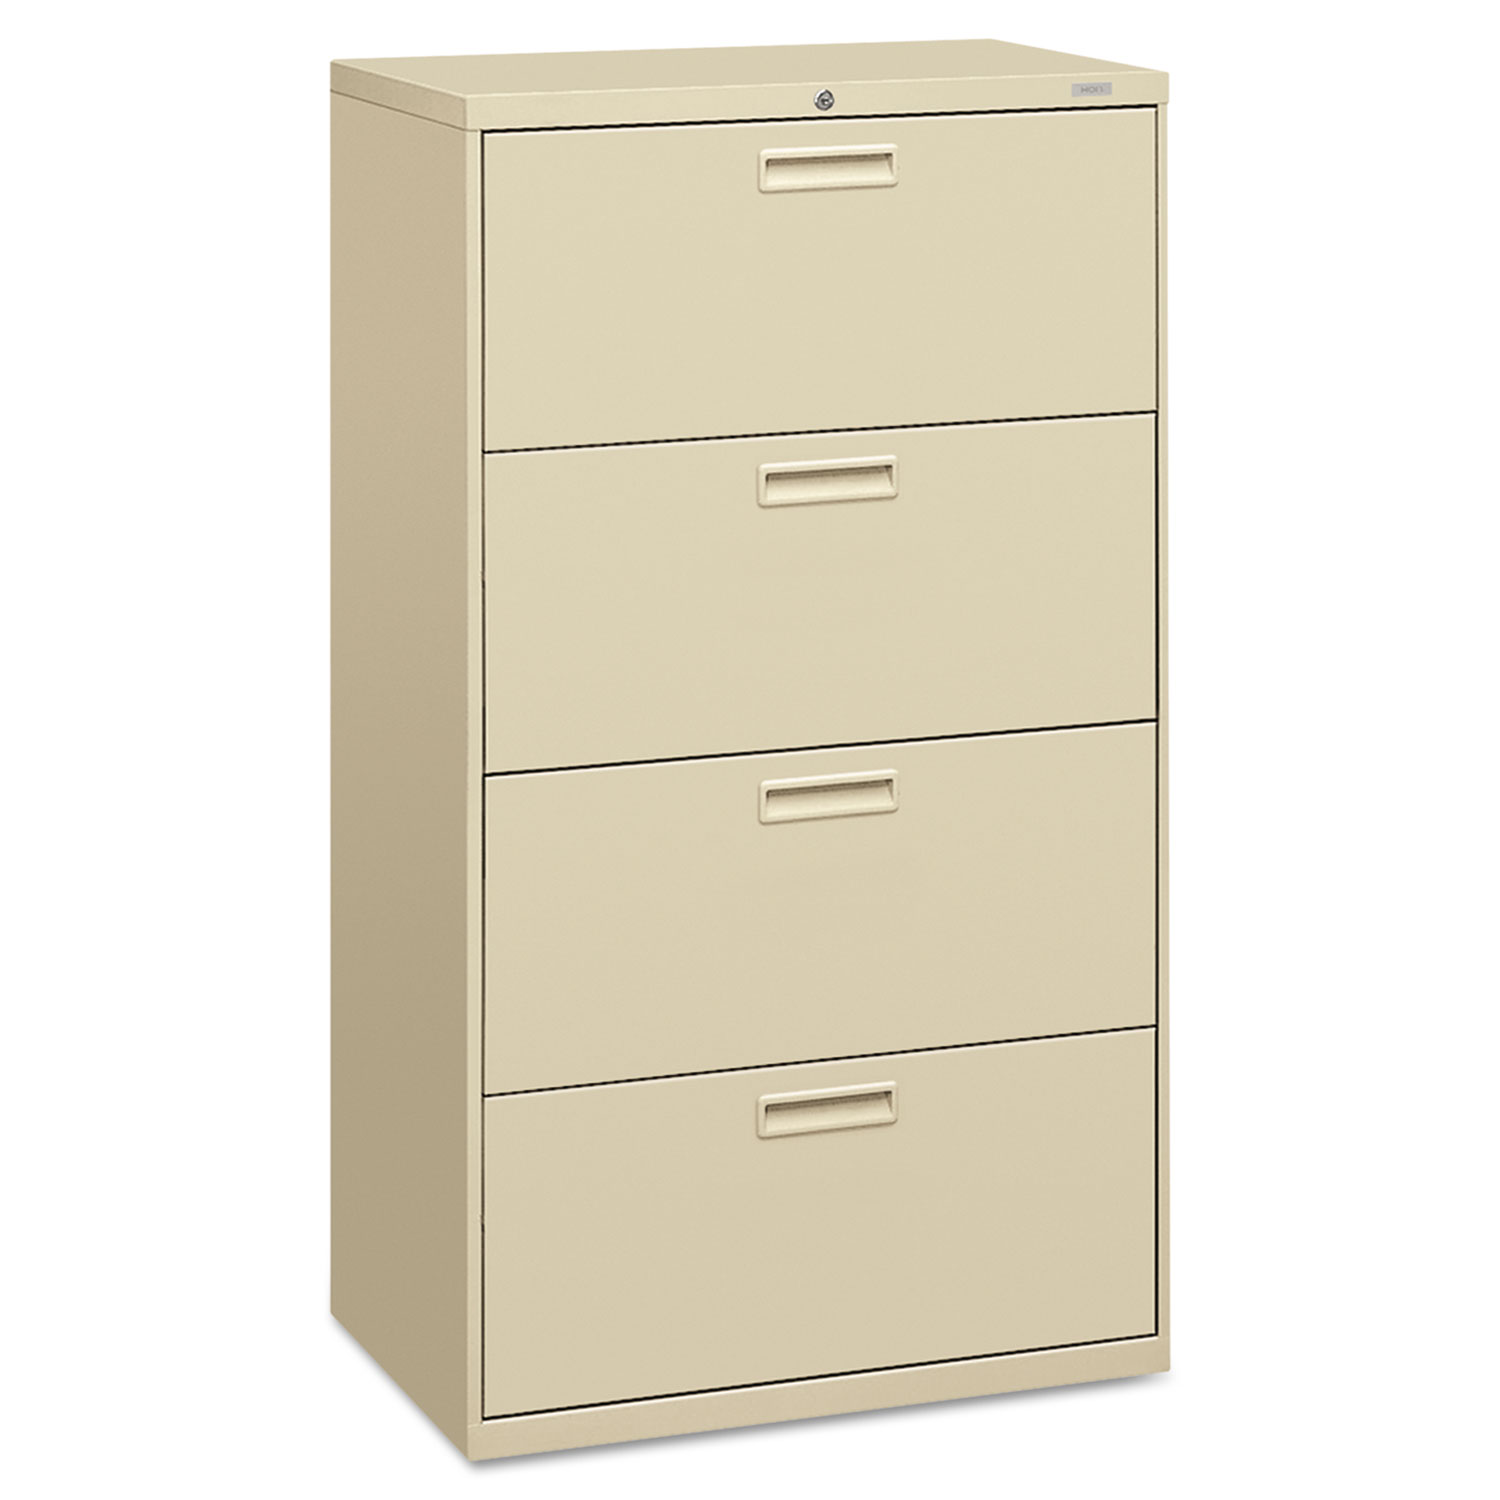 500 Series Four-Drawer Lateral File, 30w x 19-1/4d x 53-1/4h, Putty